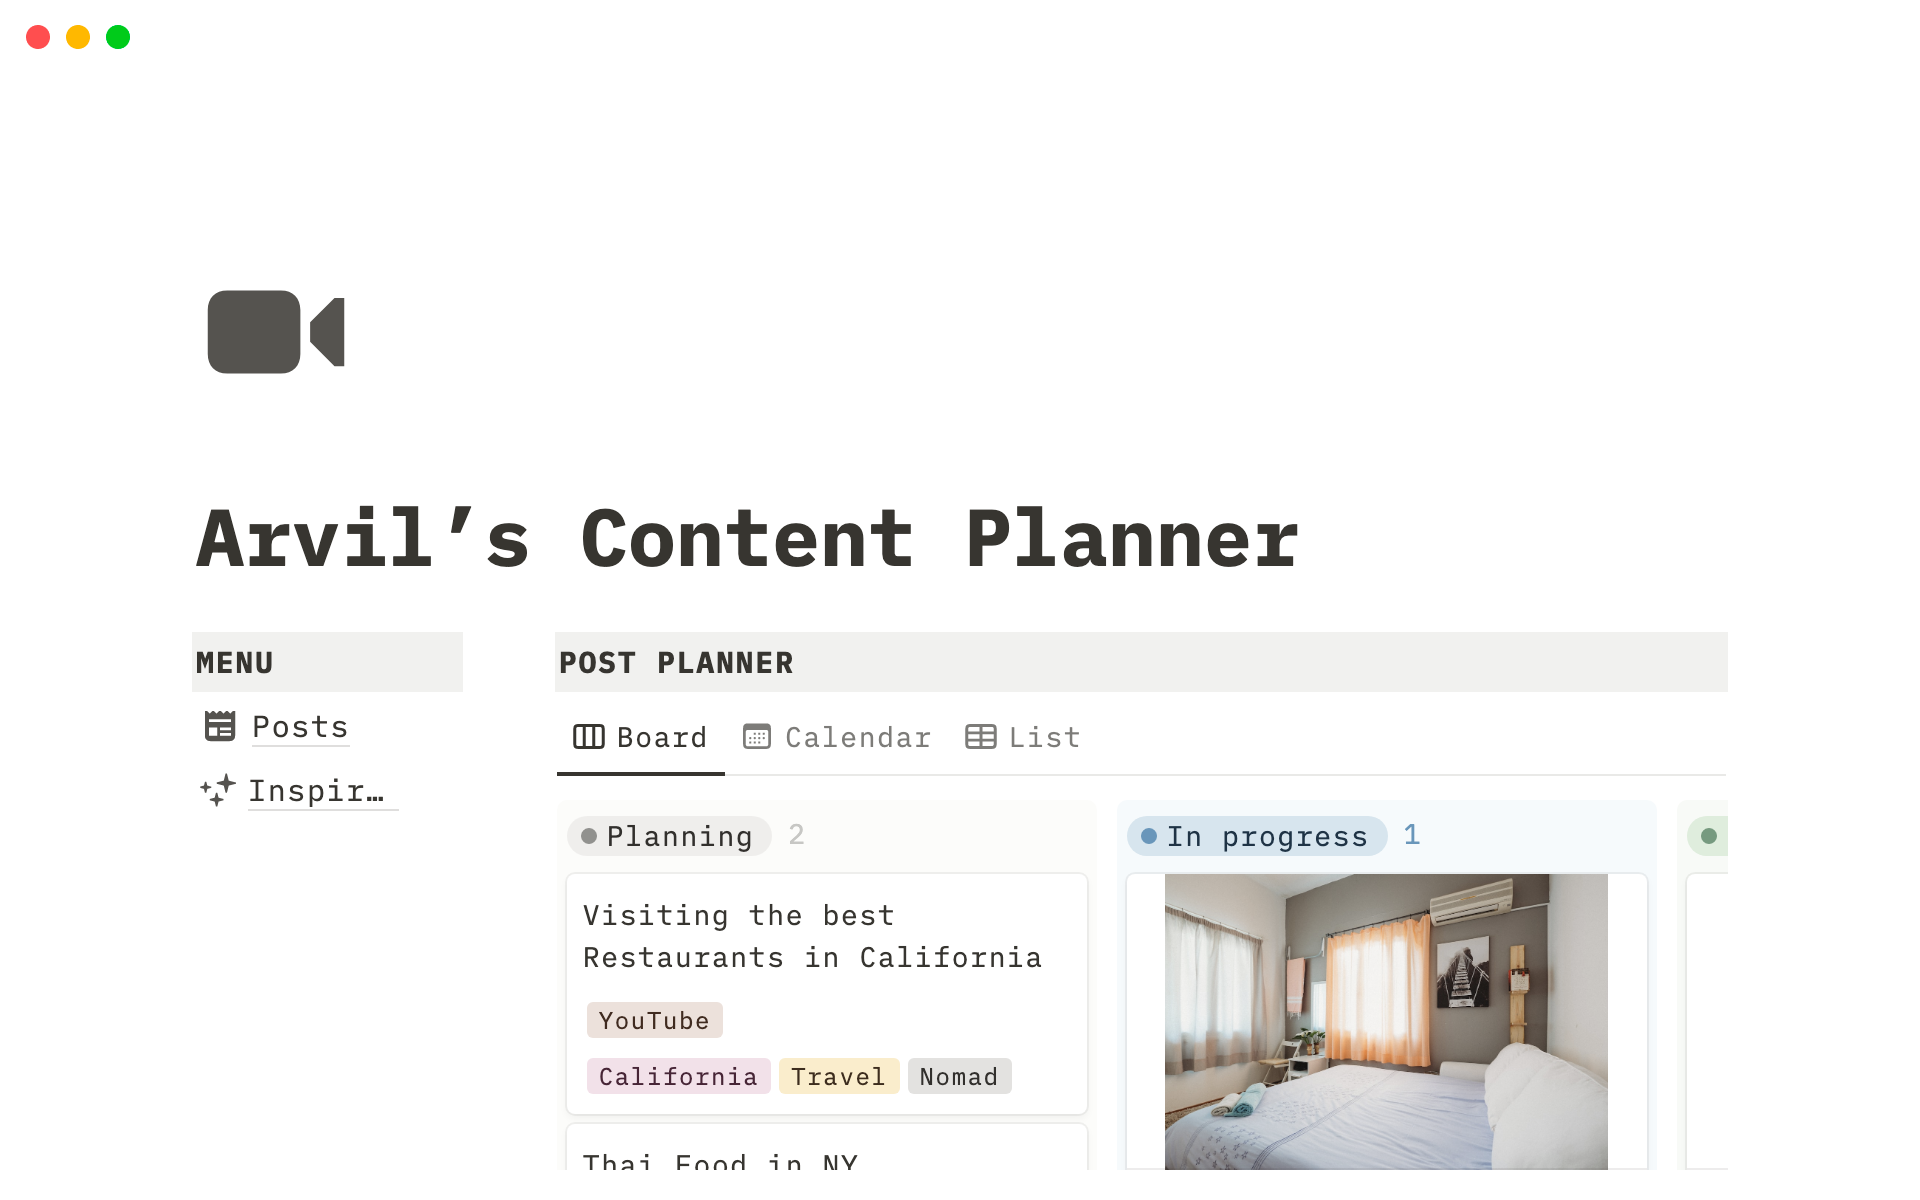 Plan and manage all your content ideas, goals and publications.